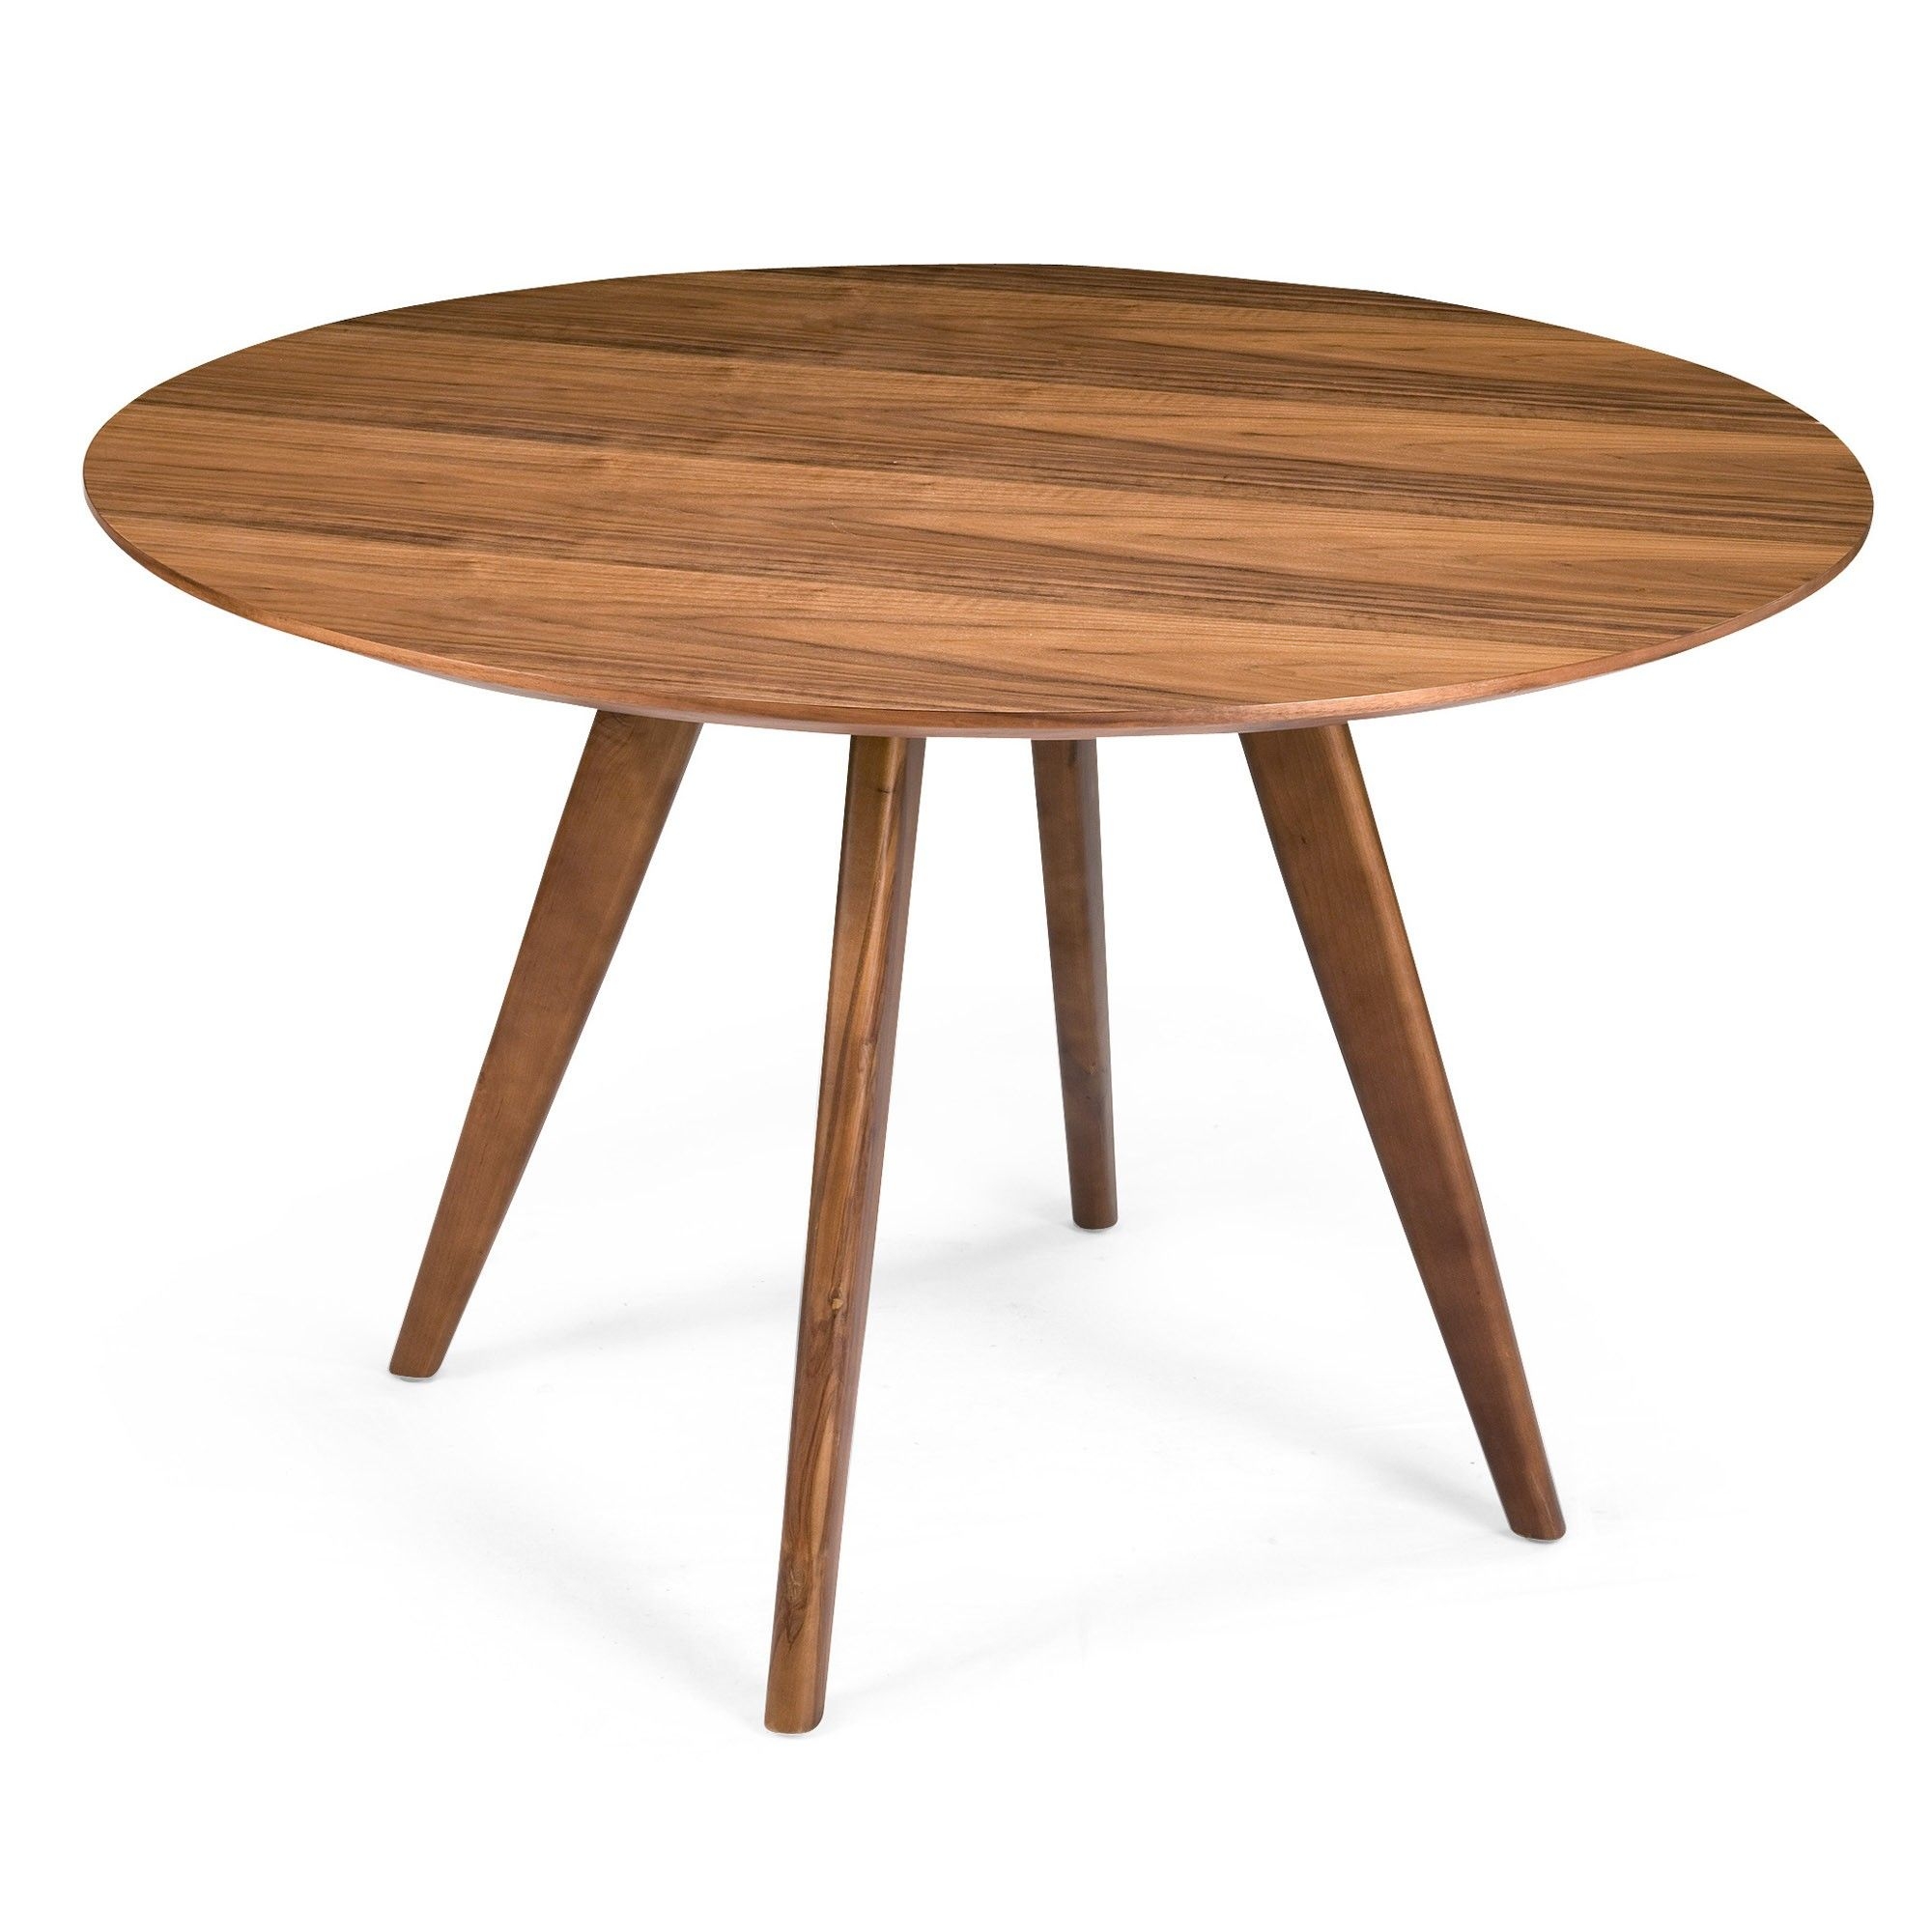 Sole walnut round dining table